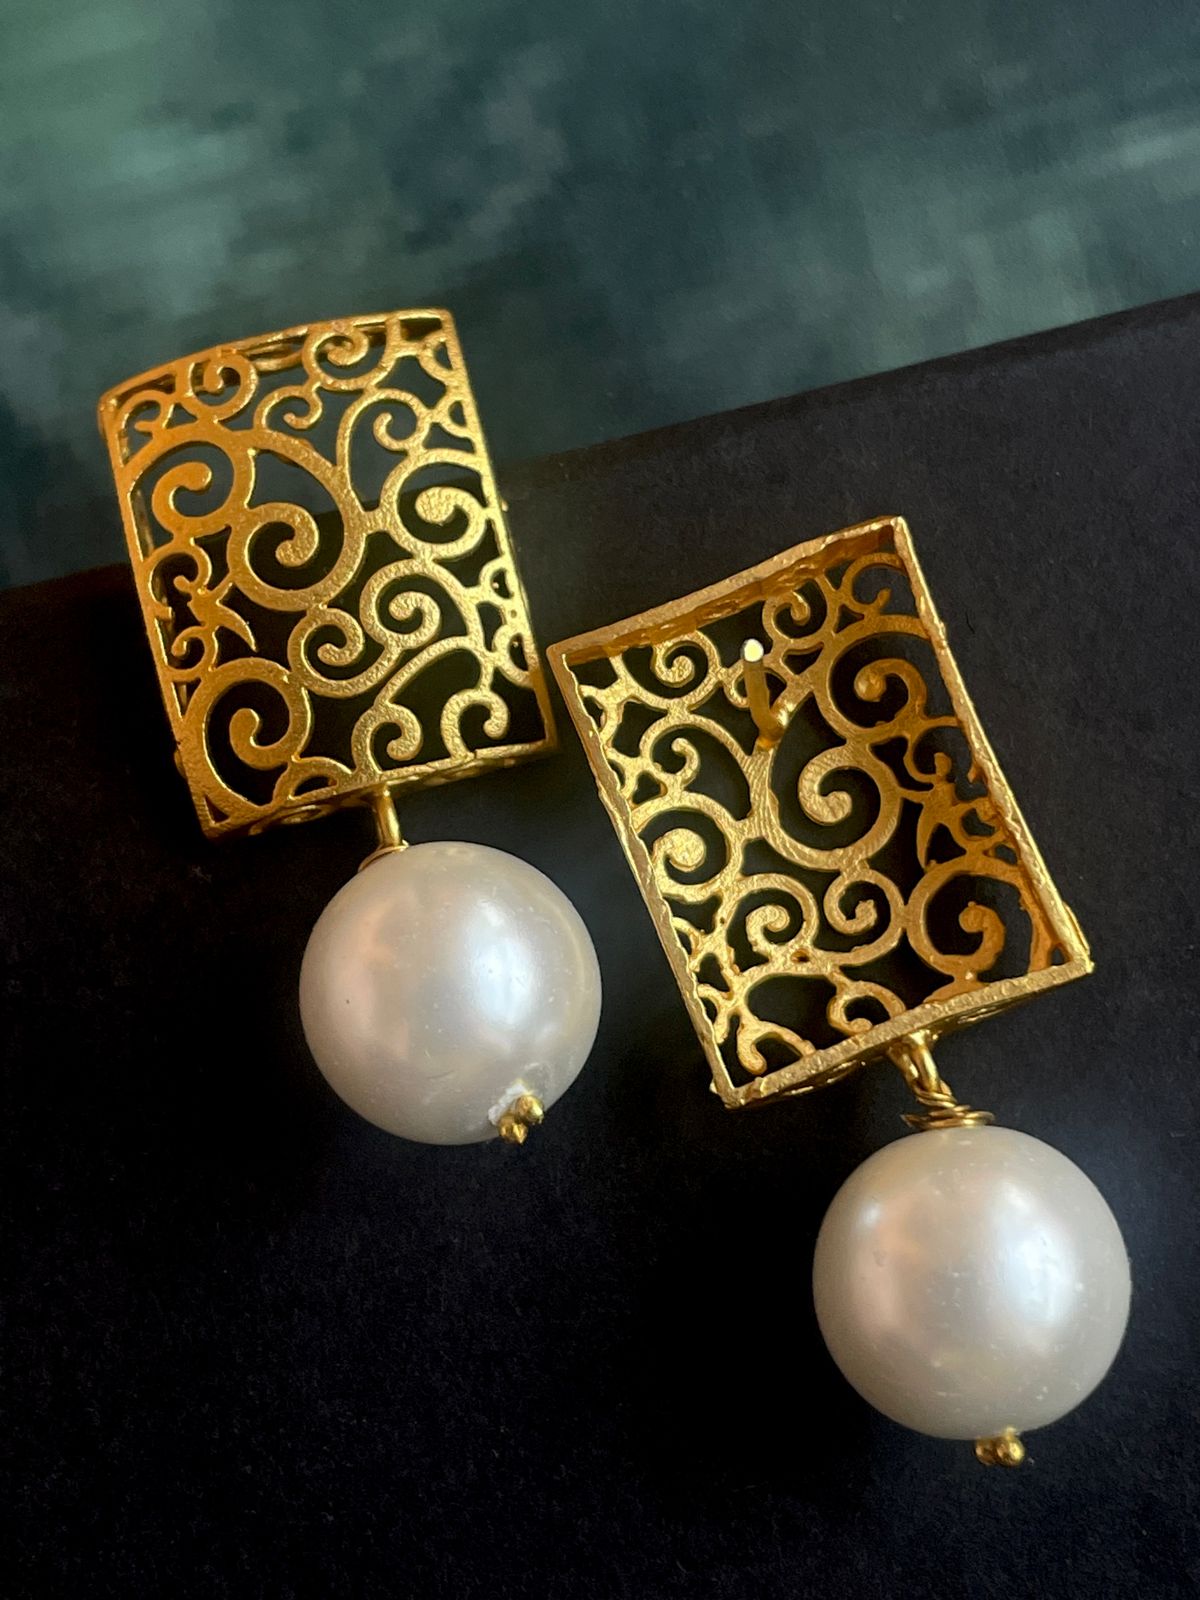 Pearl with Golden Top Stud Earring